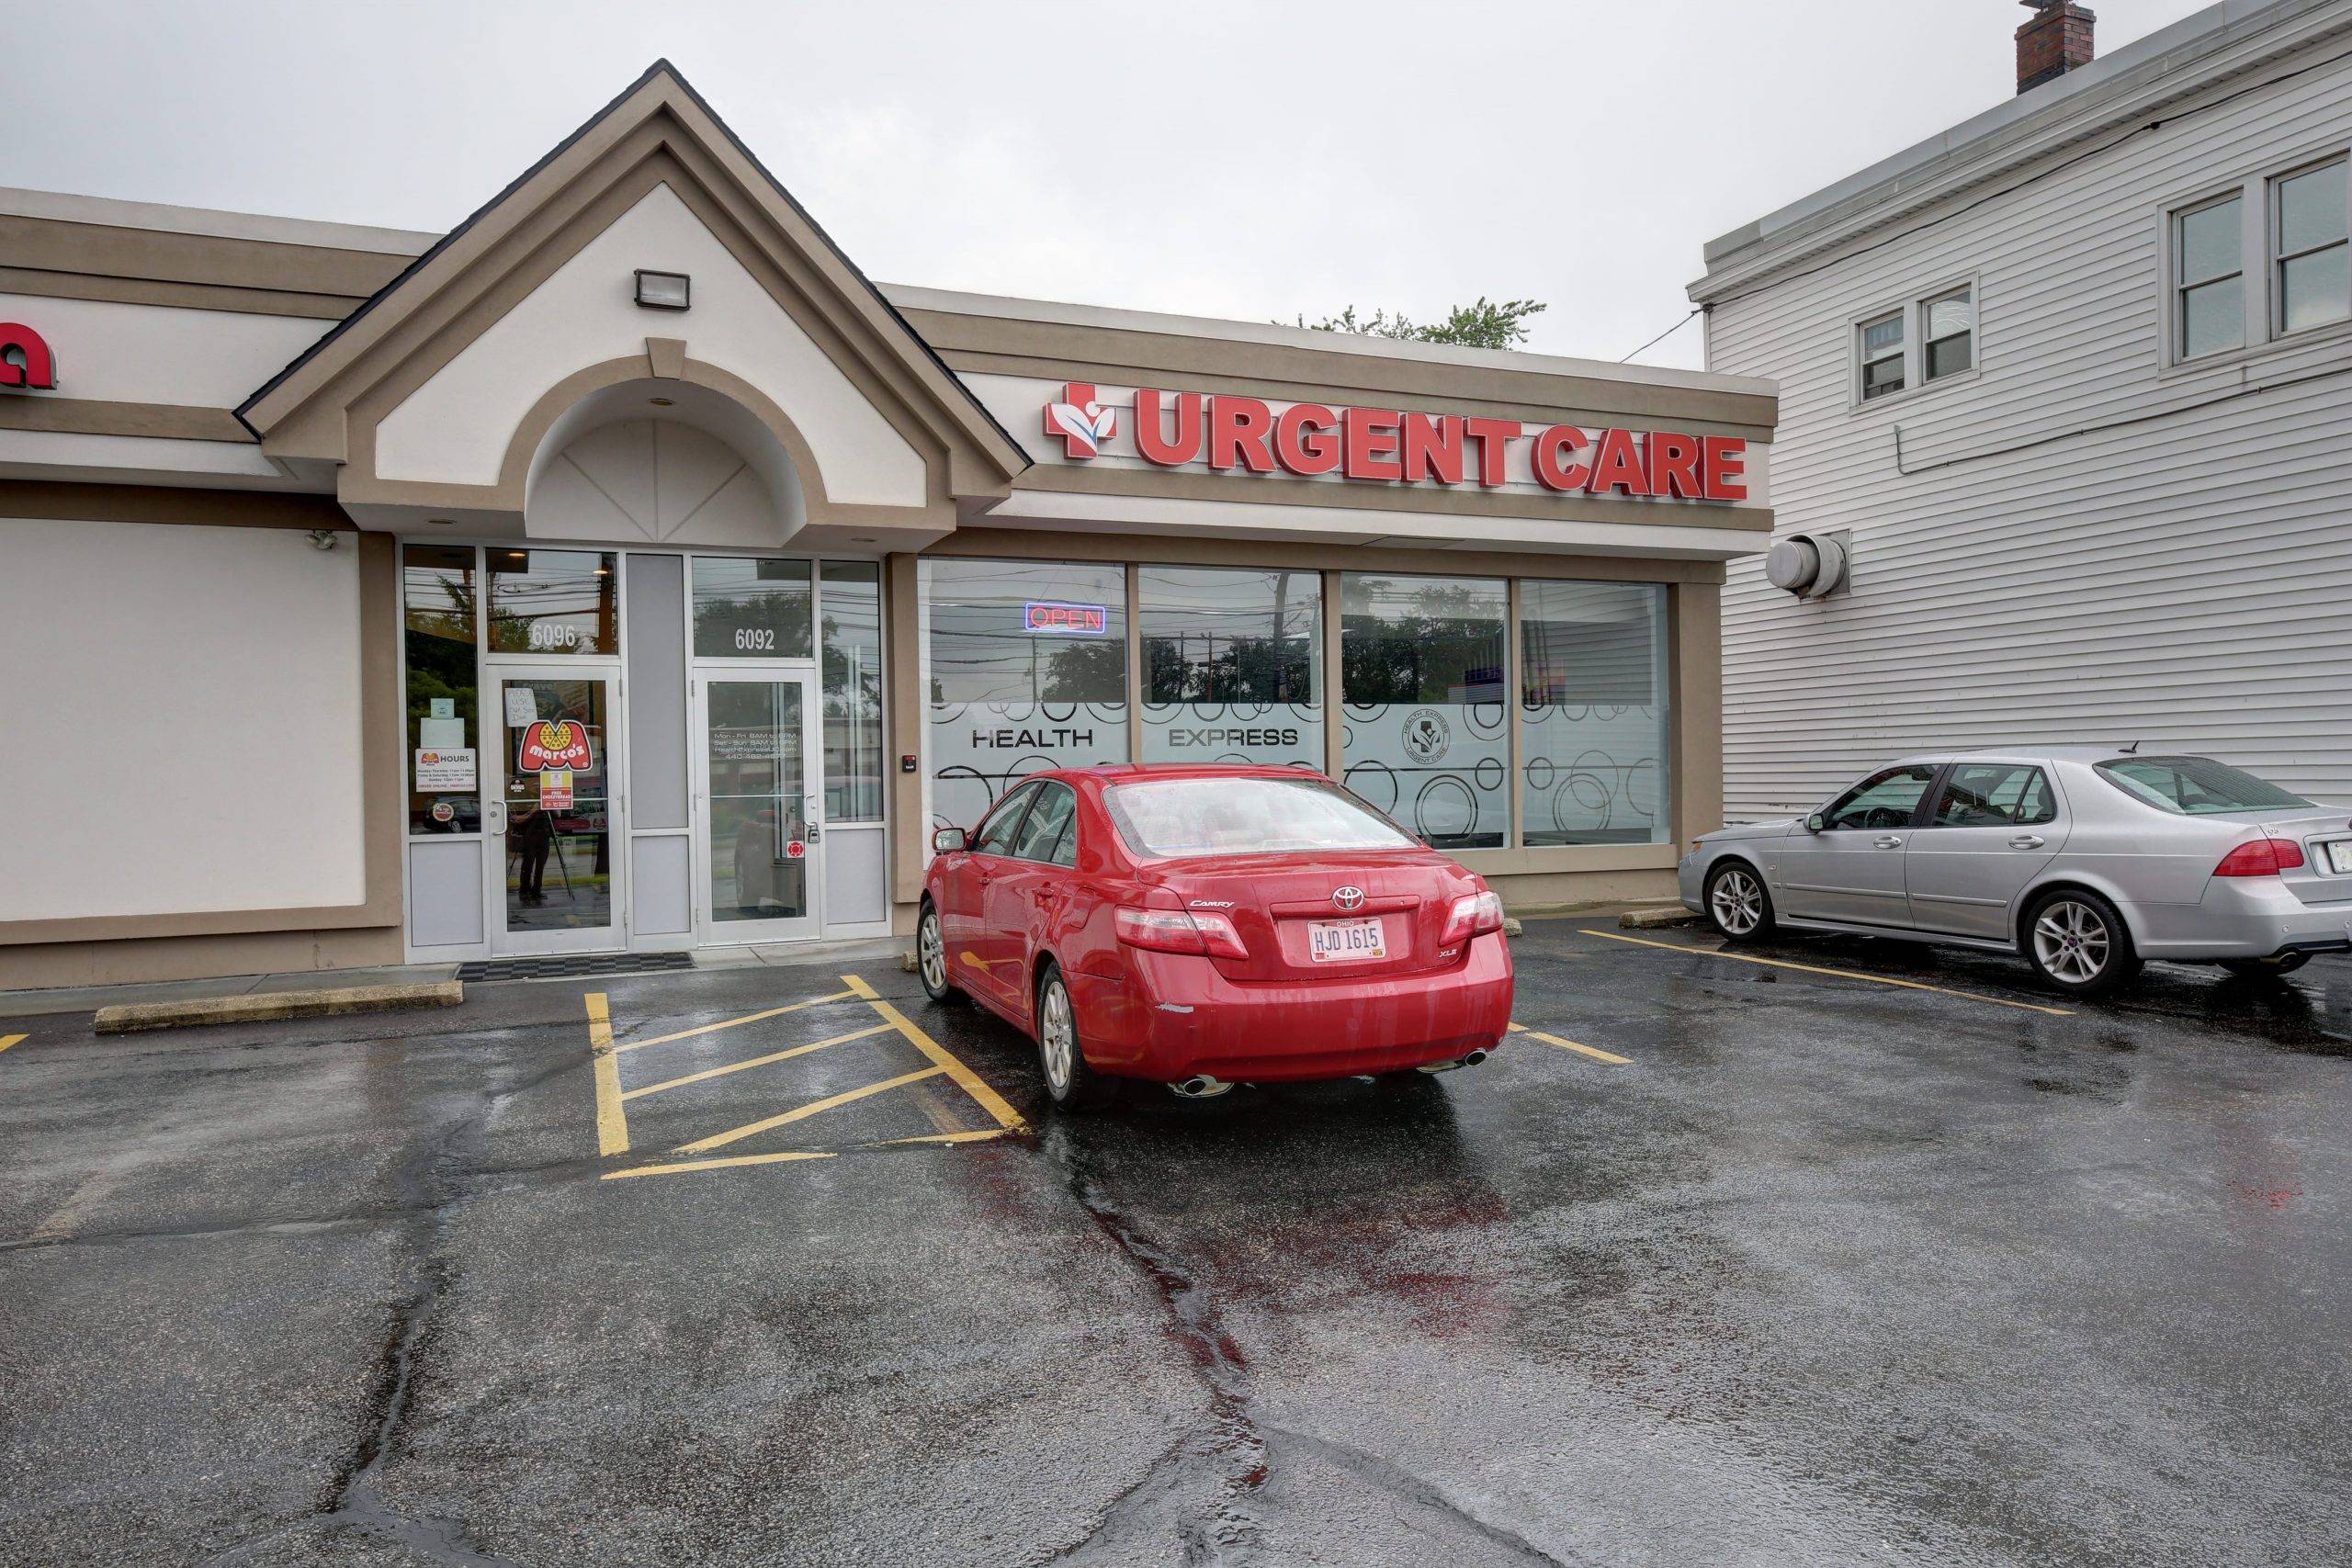 Health Express Urgent Care Mayfield Ohio min scaled